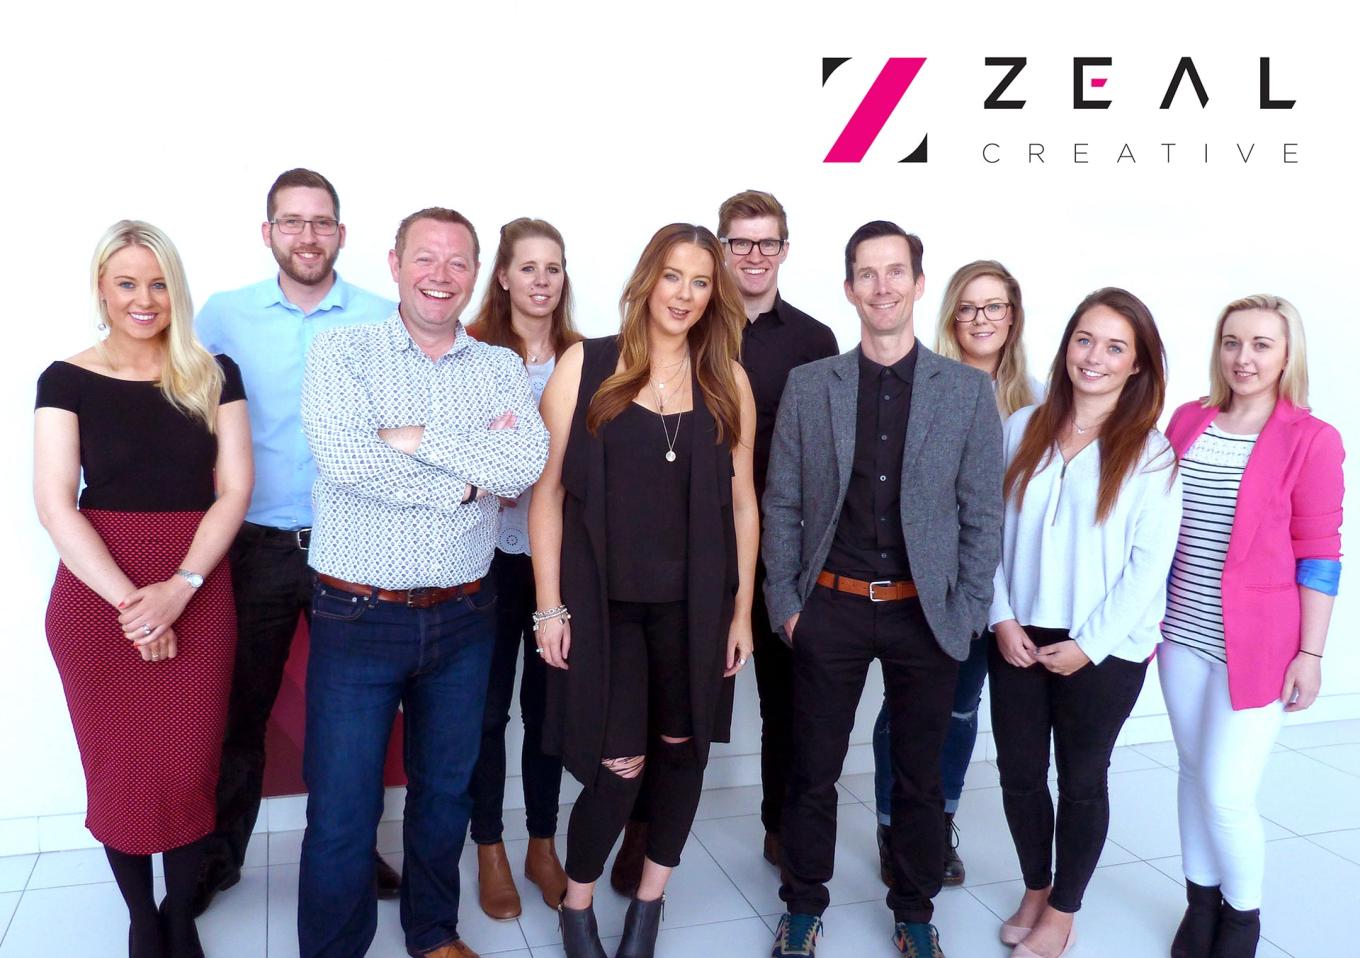 A group of employees from Zeal Creative smiling